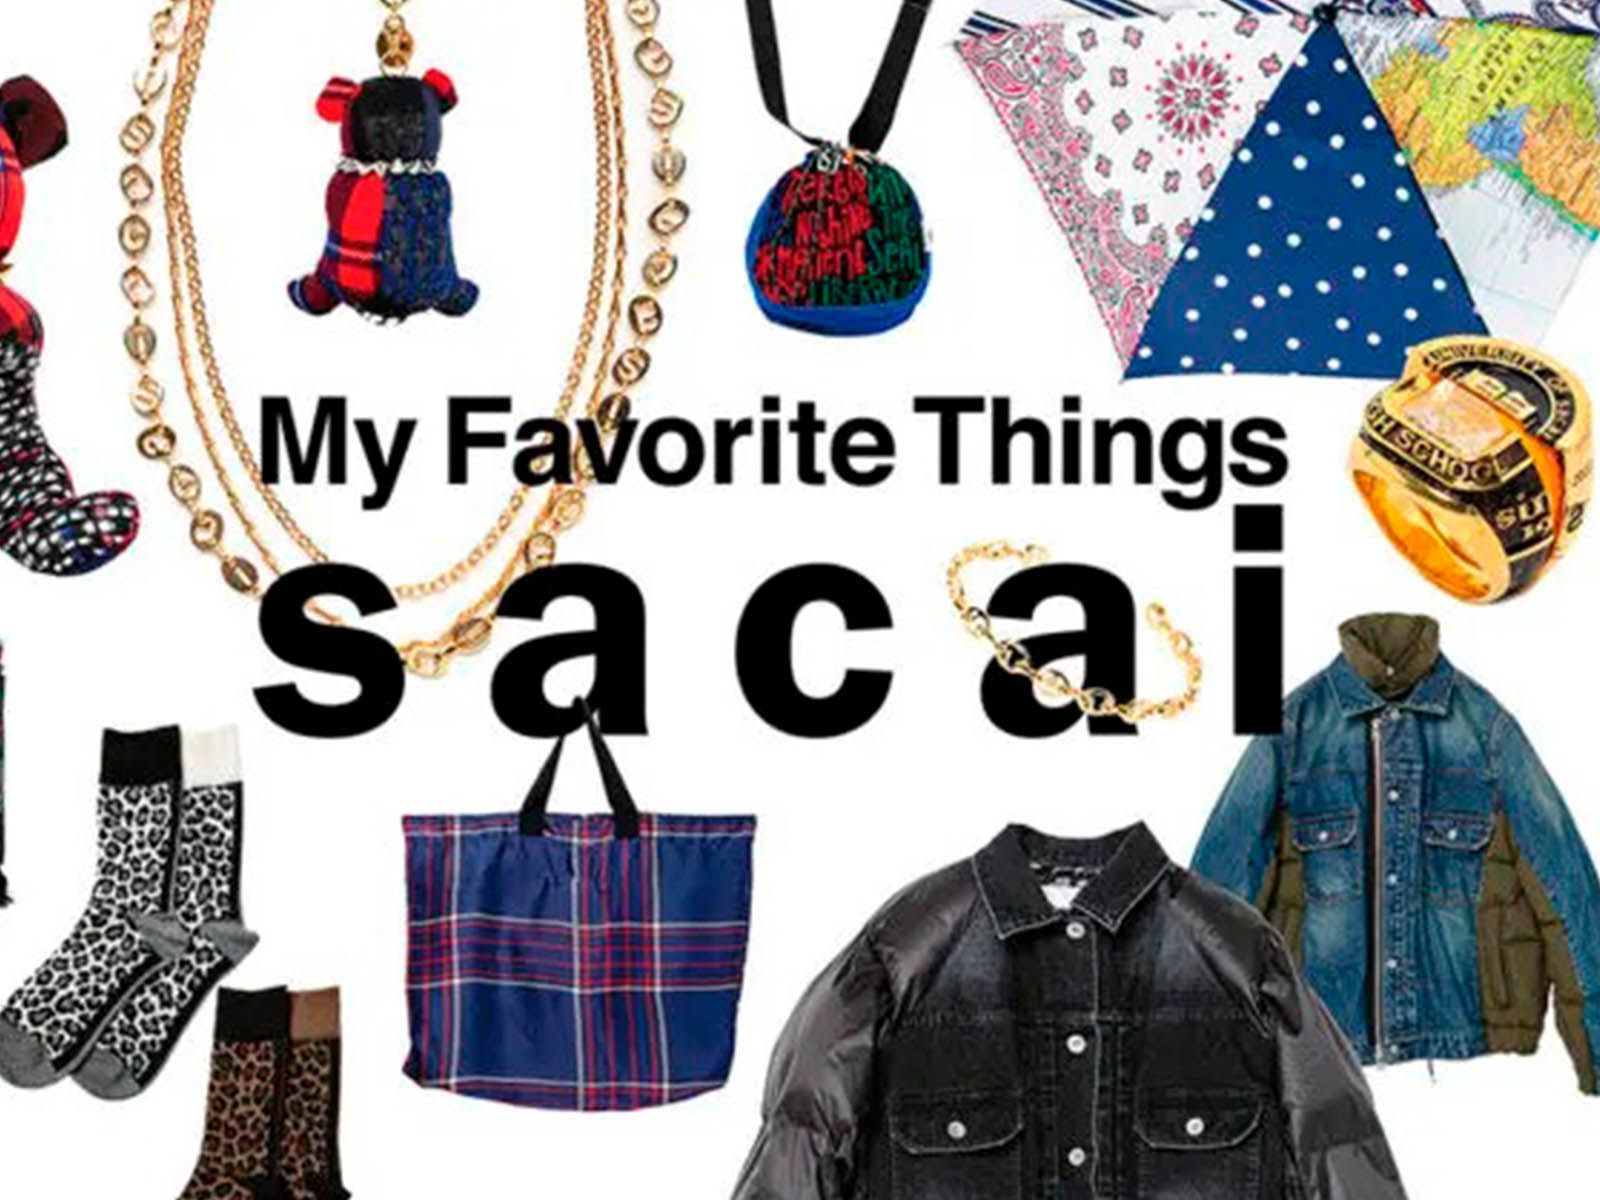 sacai unveils its Holiday 2022 collection